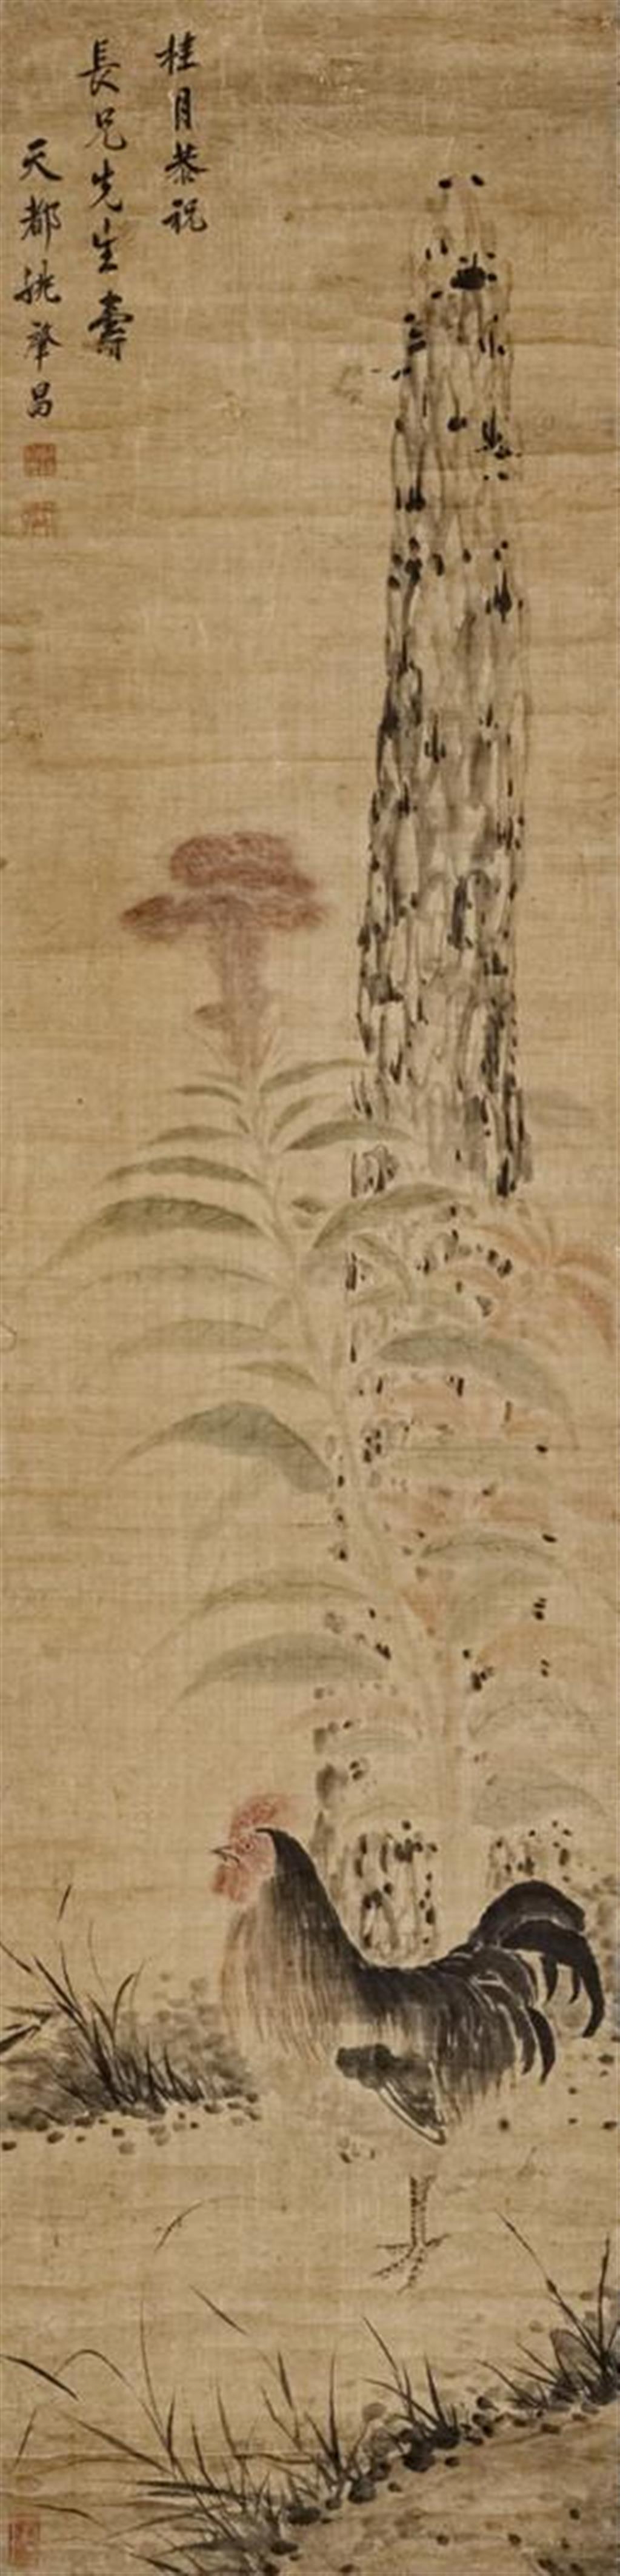 Yao Zhaochang Qing-Zeit - Rooster and cockscomb, symbolizing the wish for the scholar’s success, expressing the rebus ‘may you rise in rank'. - image-1